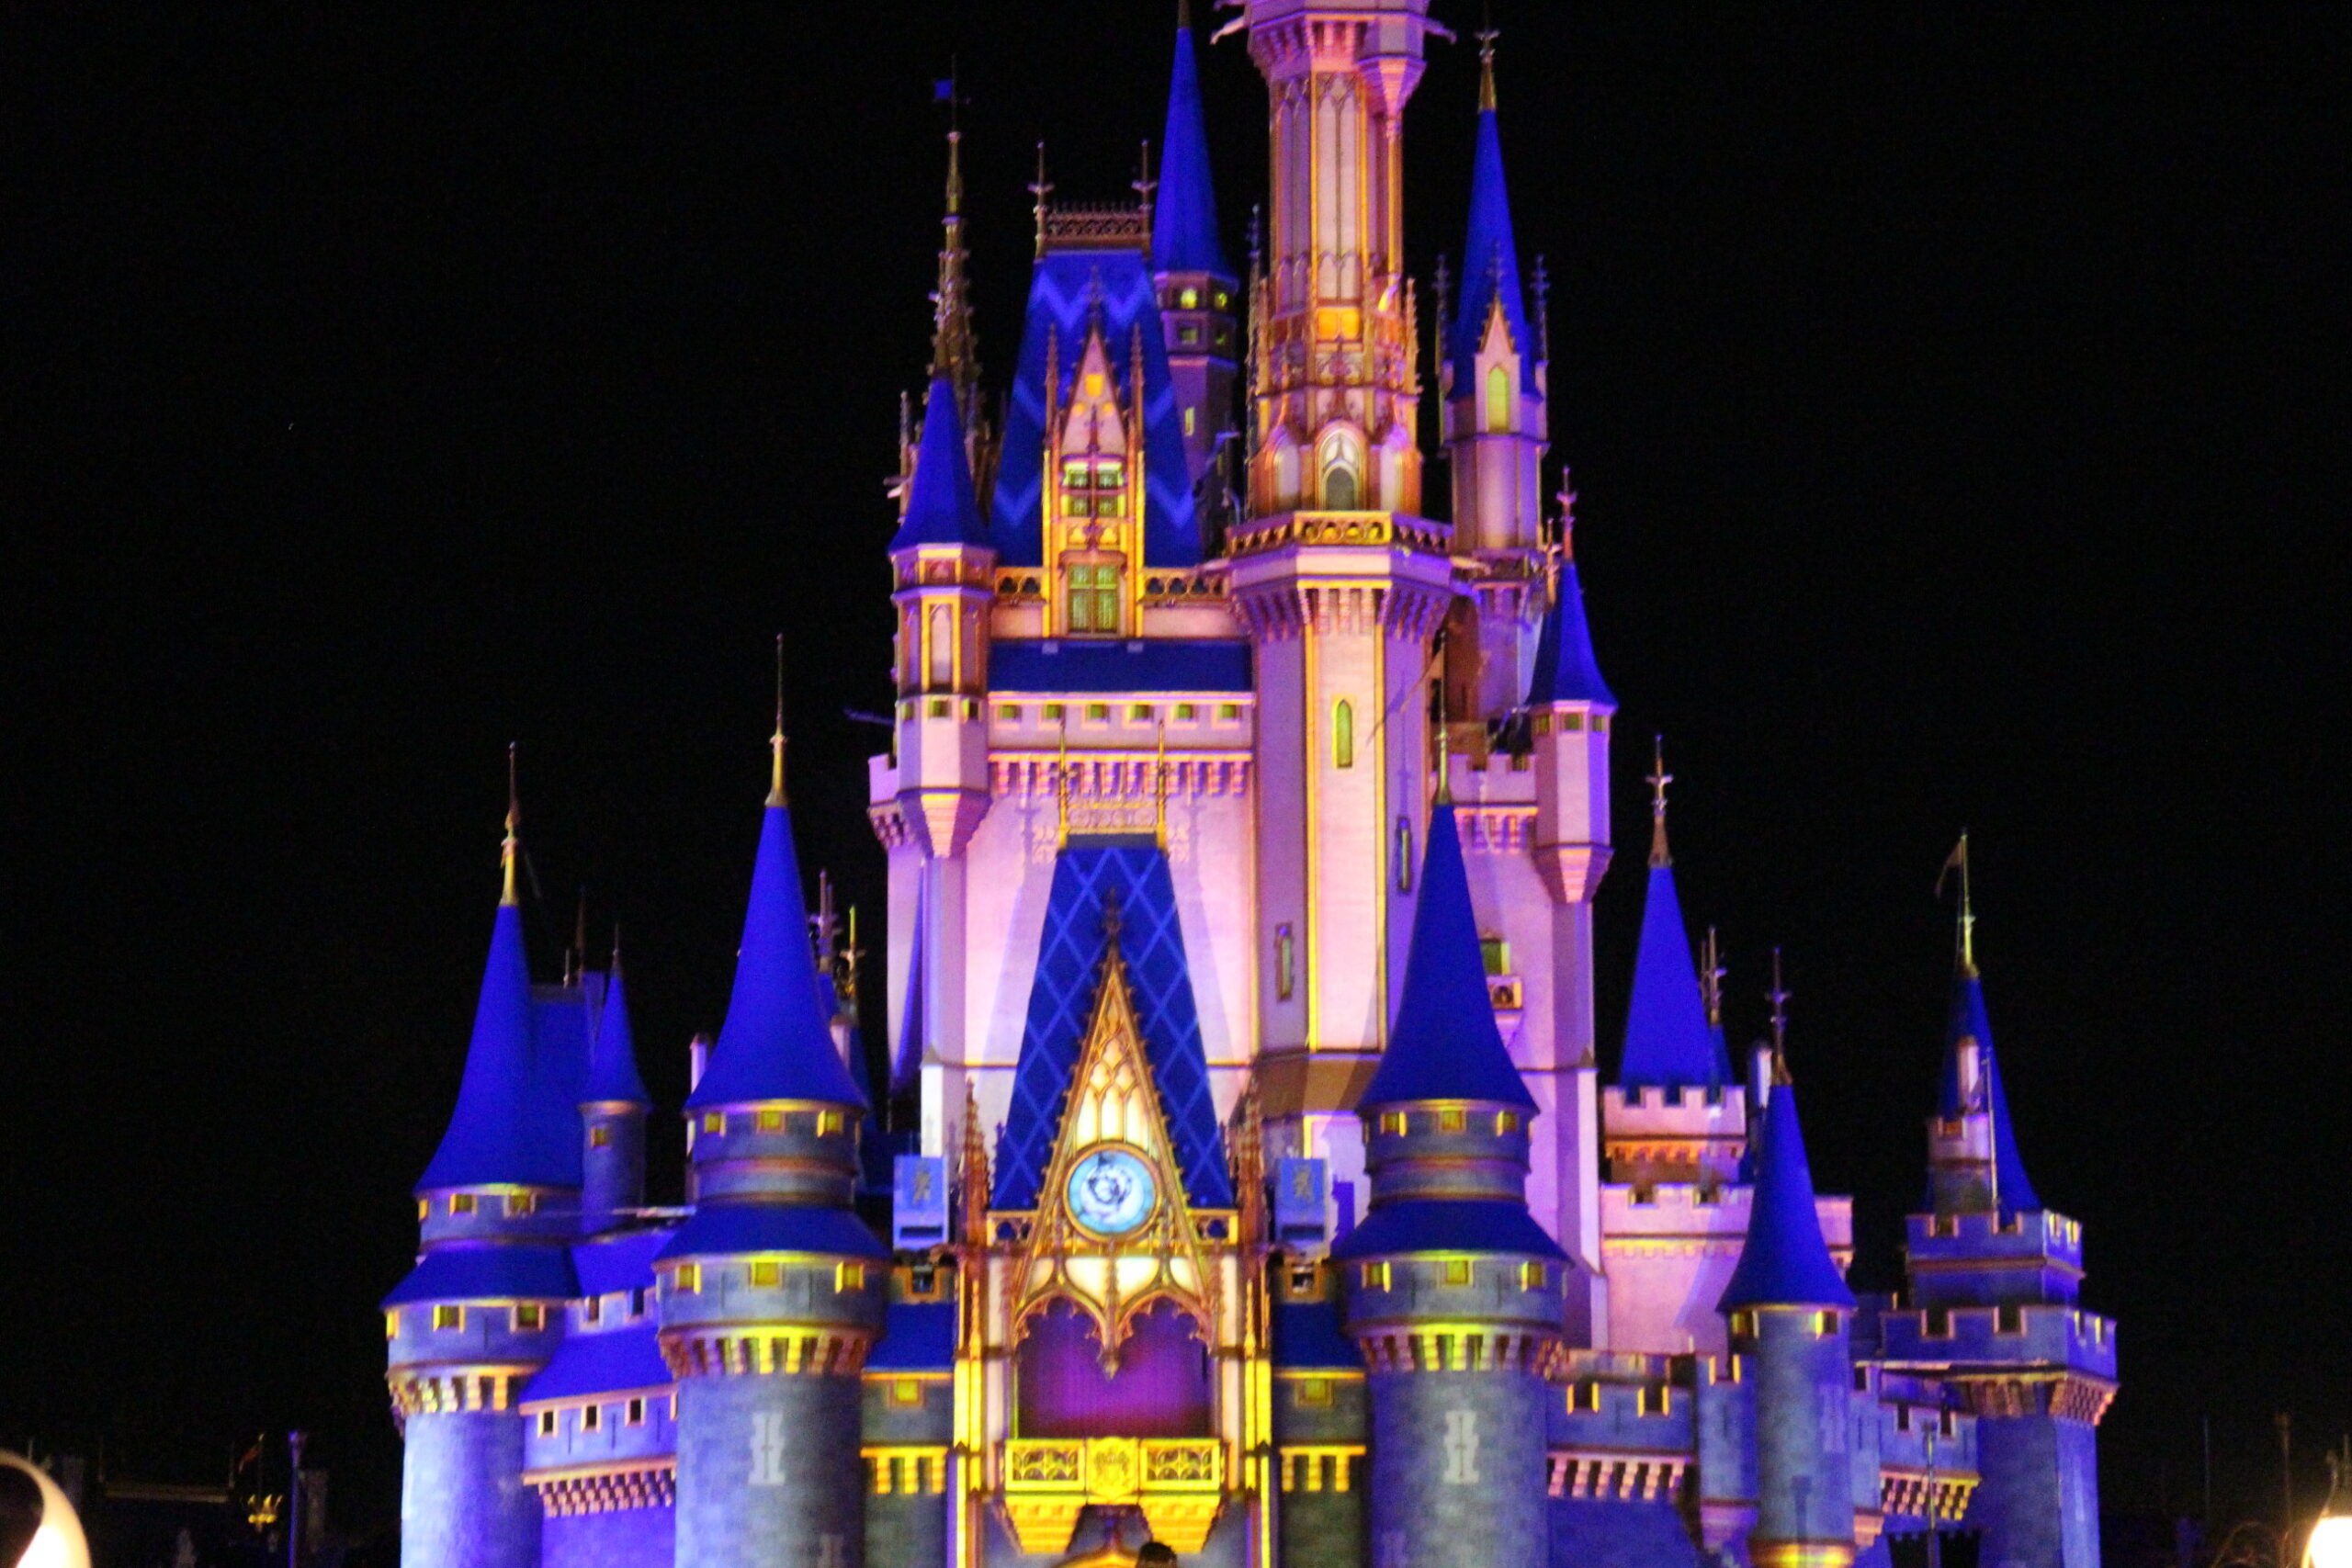 The Disney World castle illuminated at night by projections that make it a vibrant light pink color with turret roofs that are a stunning cobalt blue.